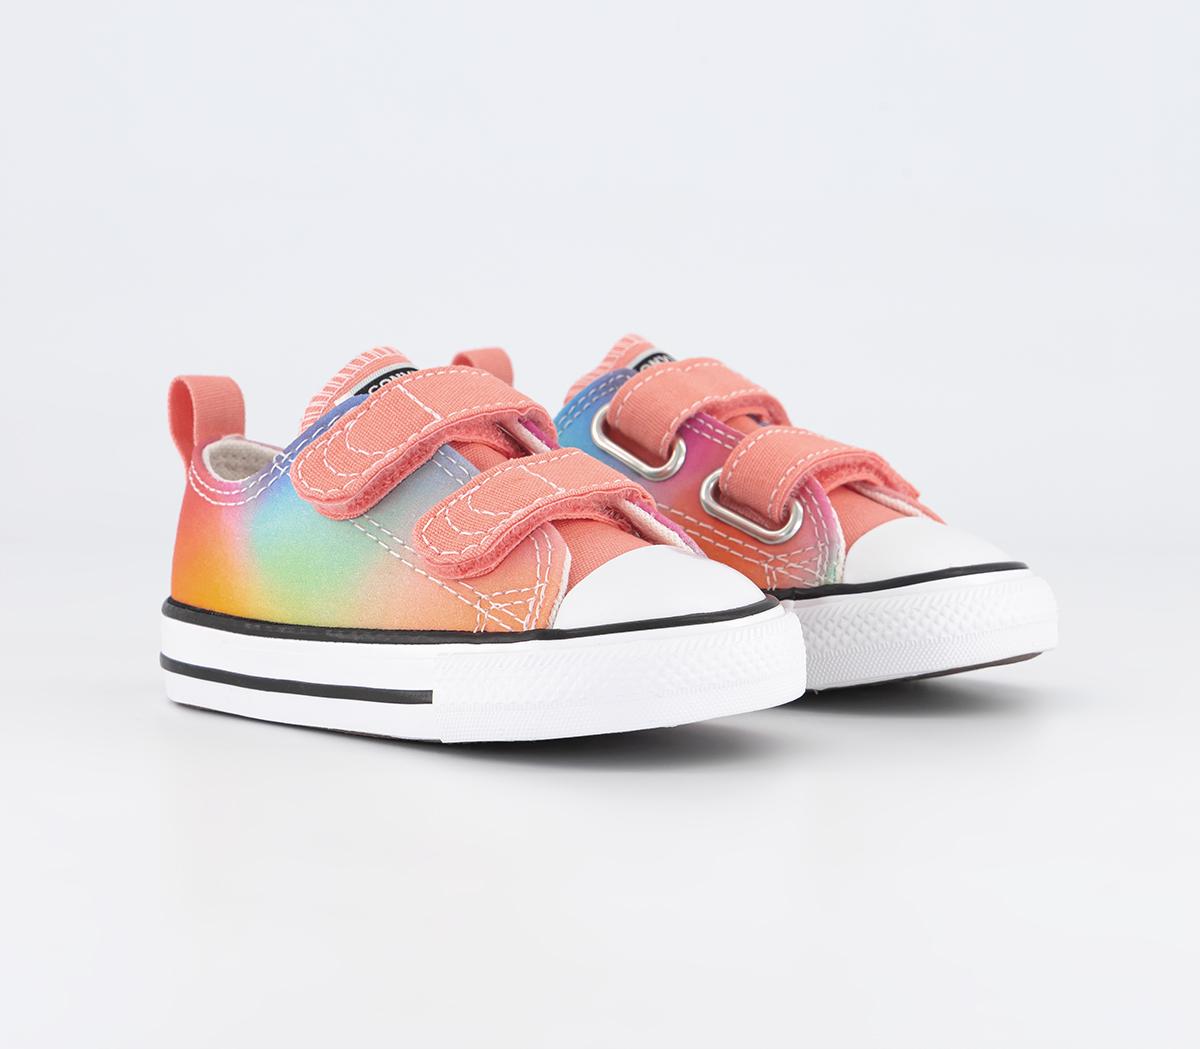 Converse Kids All Star 2vlace Trainers Lawn Flamingo Aqua Mist Astral, 10 Youth